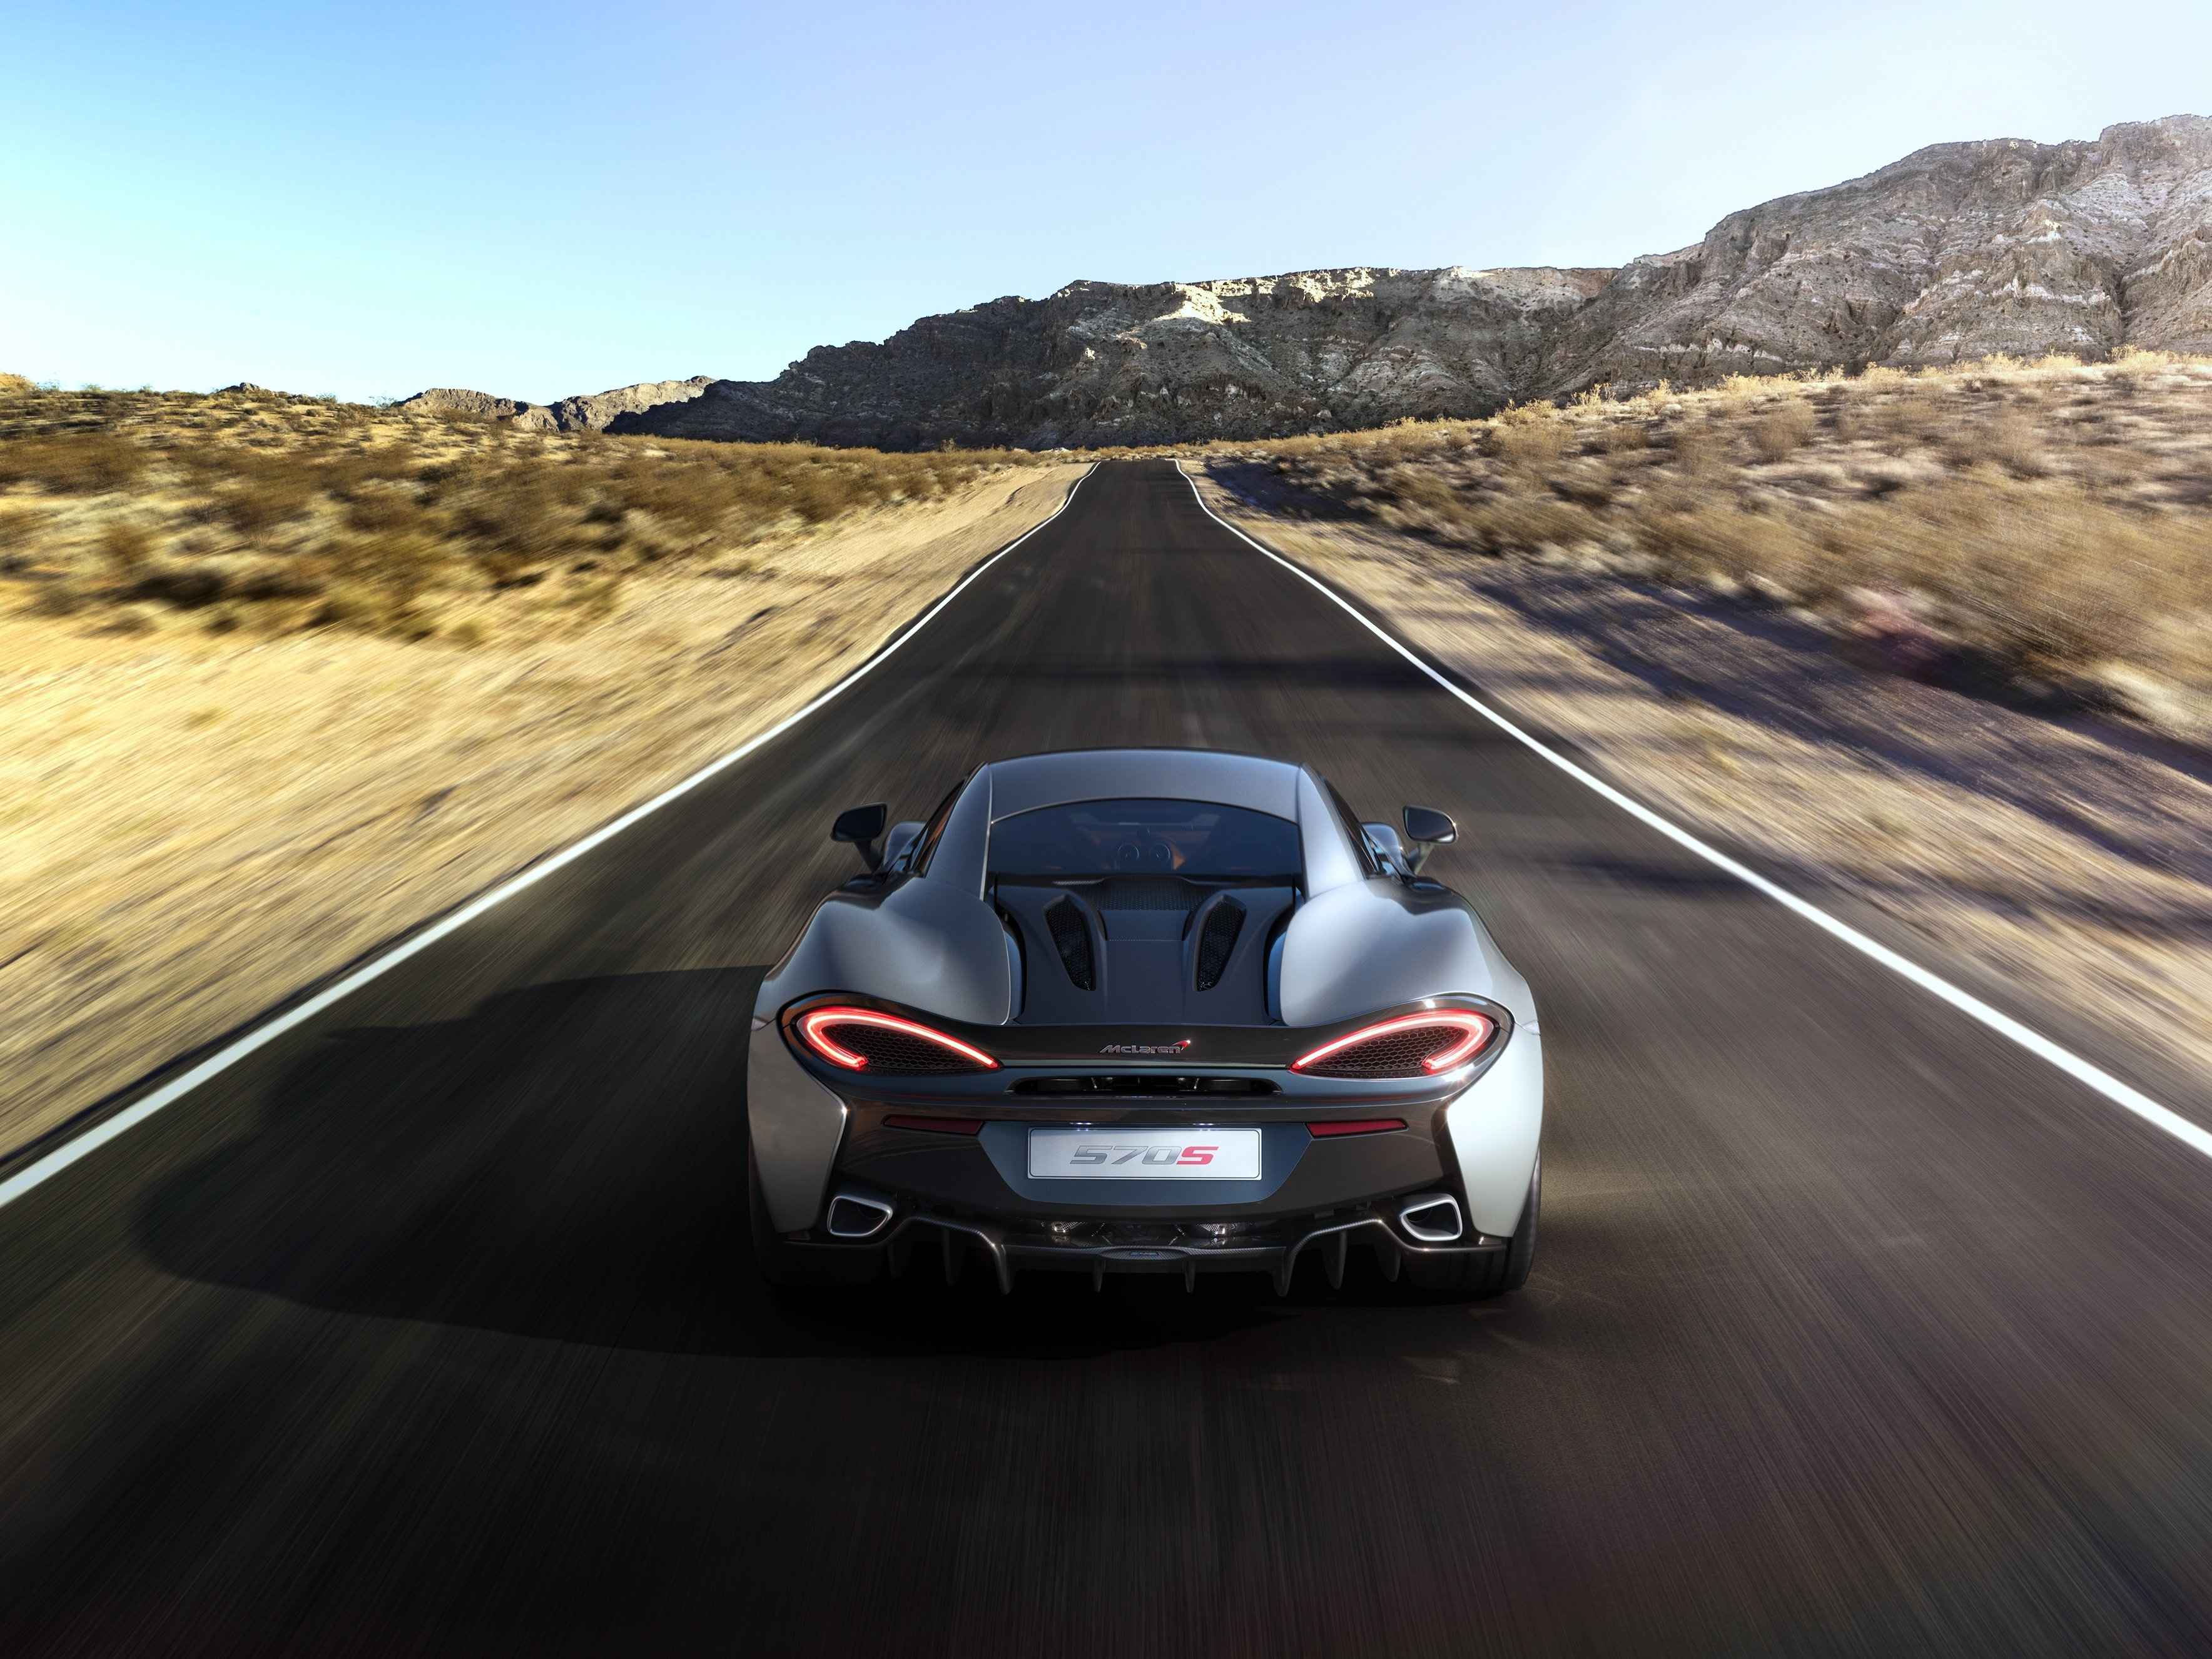 Cool Backgrounds cars, back view, 570s, rear view Mclaren